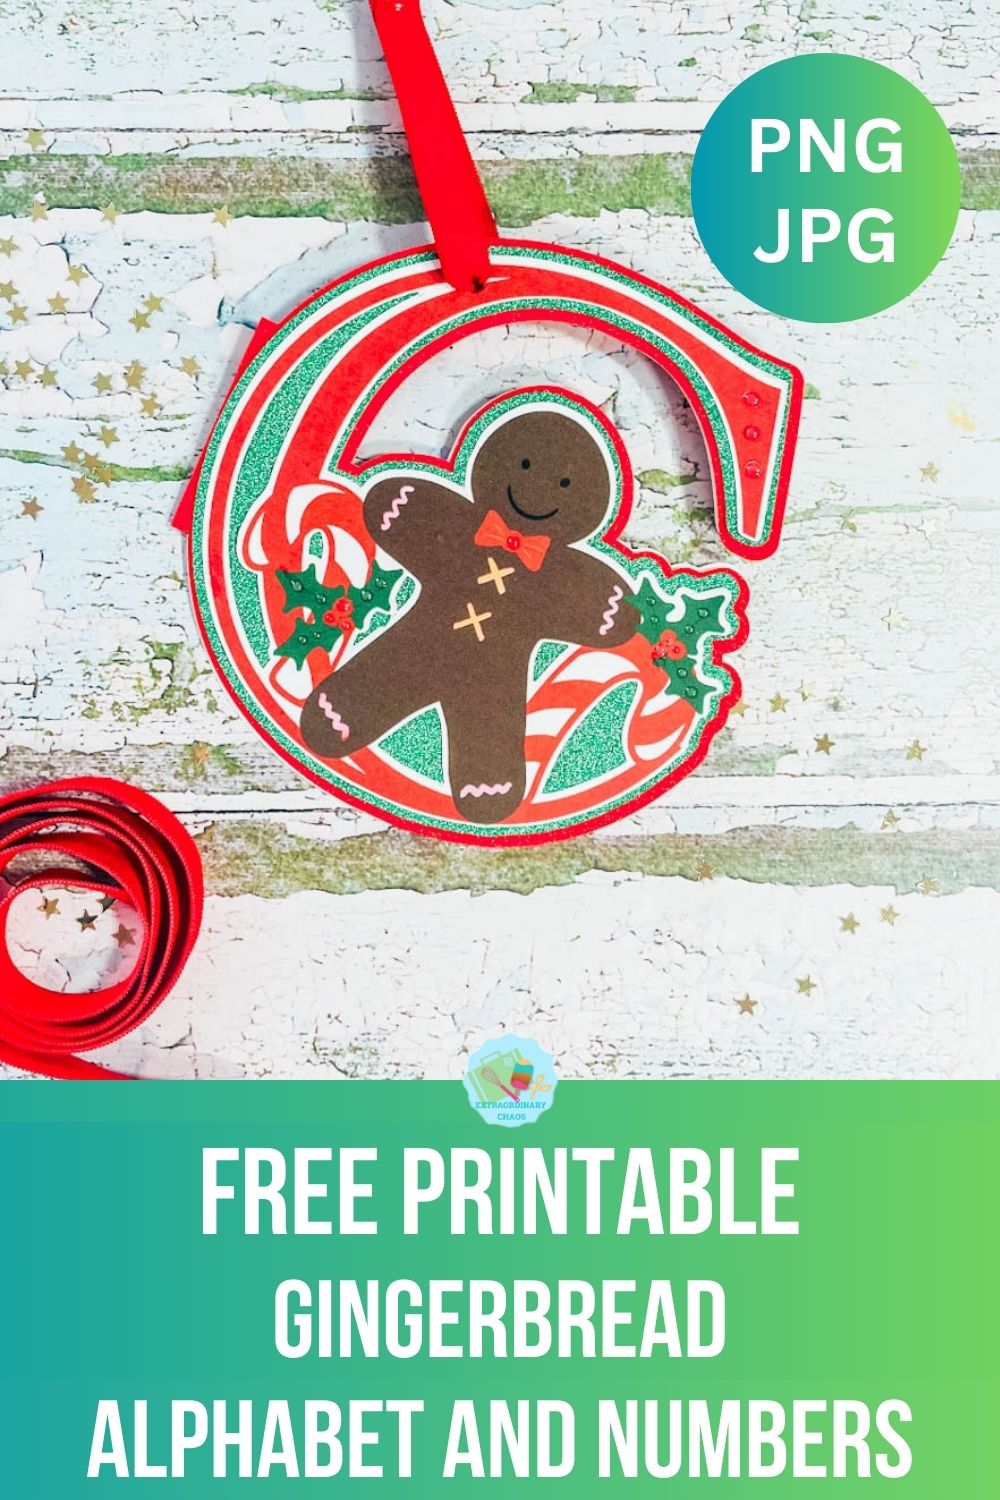 Free printable Gingerbread alphabet letters and numbers for print and cut projects